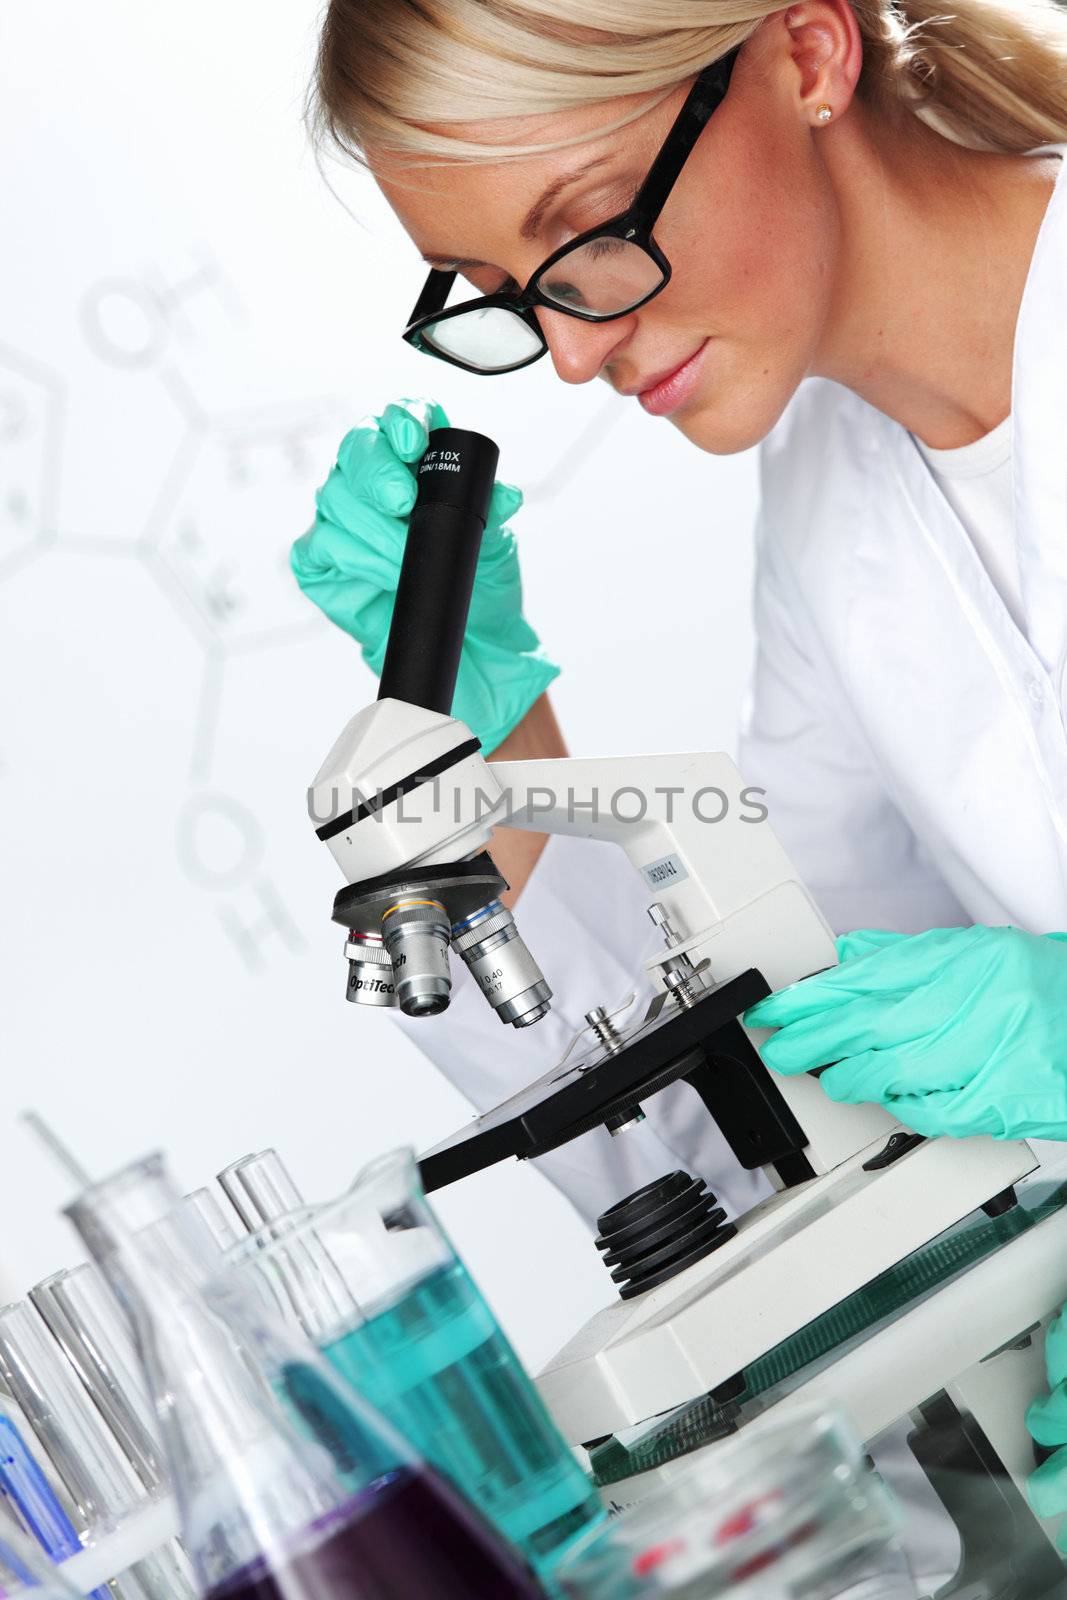 scientist in chemical lab conducting experiments